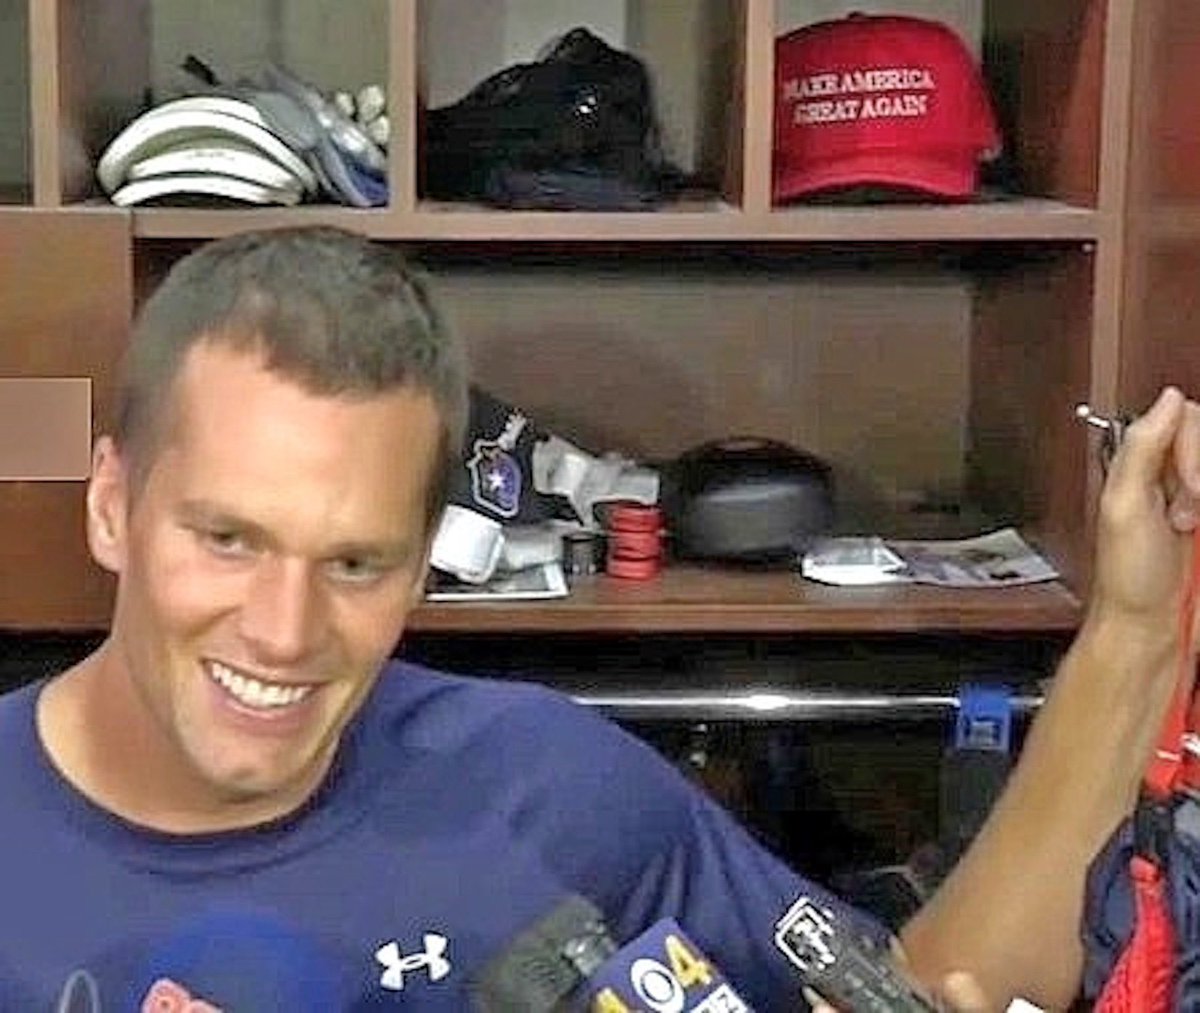 Y’all cheering for Tom Brady like he ain’t have a maga hat in his locker